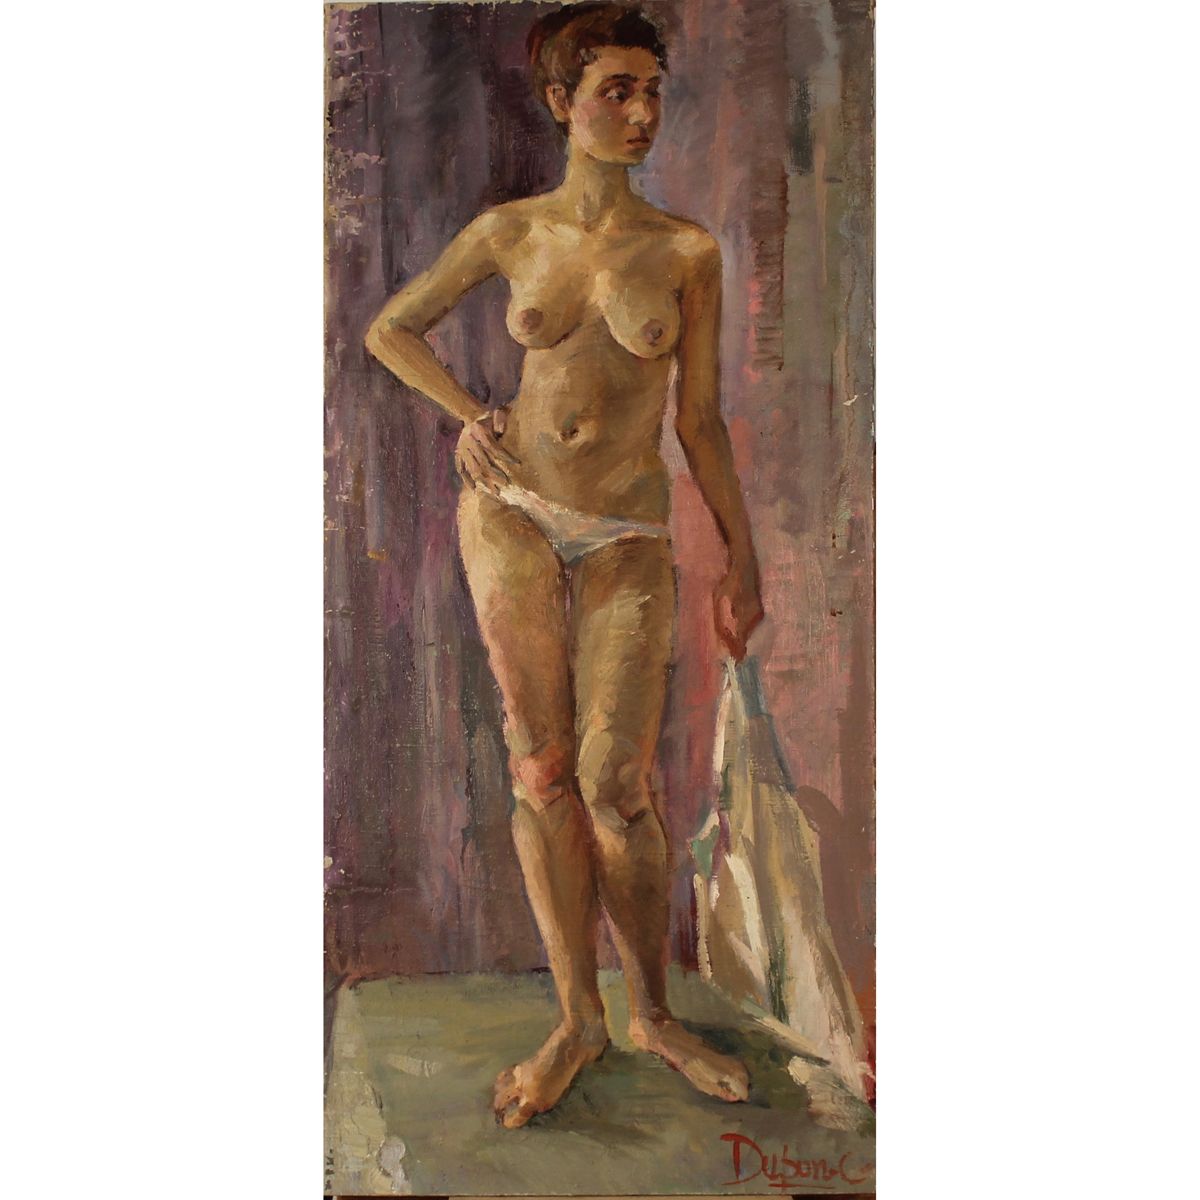 NUDO DI DONNA - NUDE WOMAN Oil painting on canvas. Beginning 20th century. Indis&hellip;